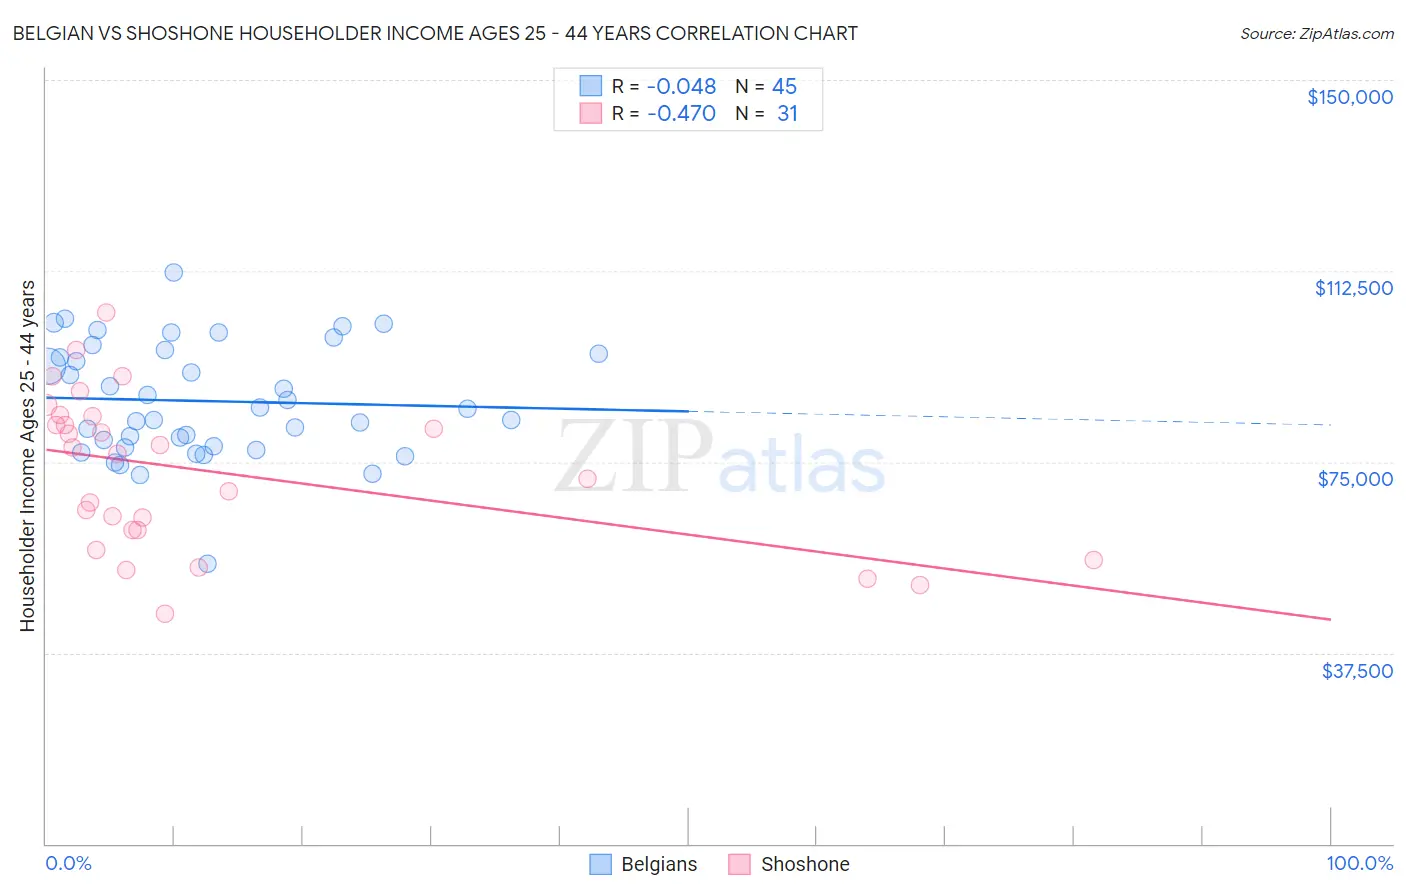 Belgian vs Shoshone Householder Income Ages 25 - 44 years